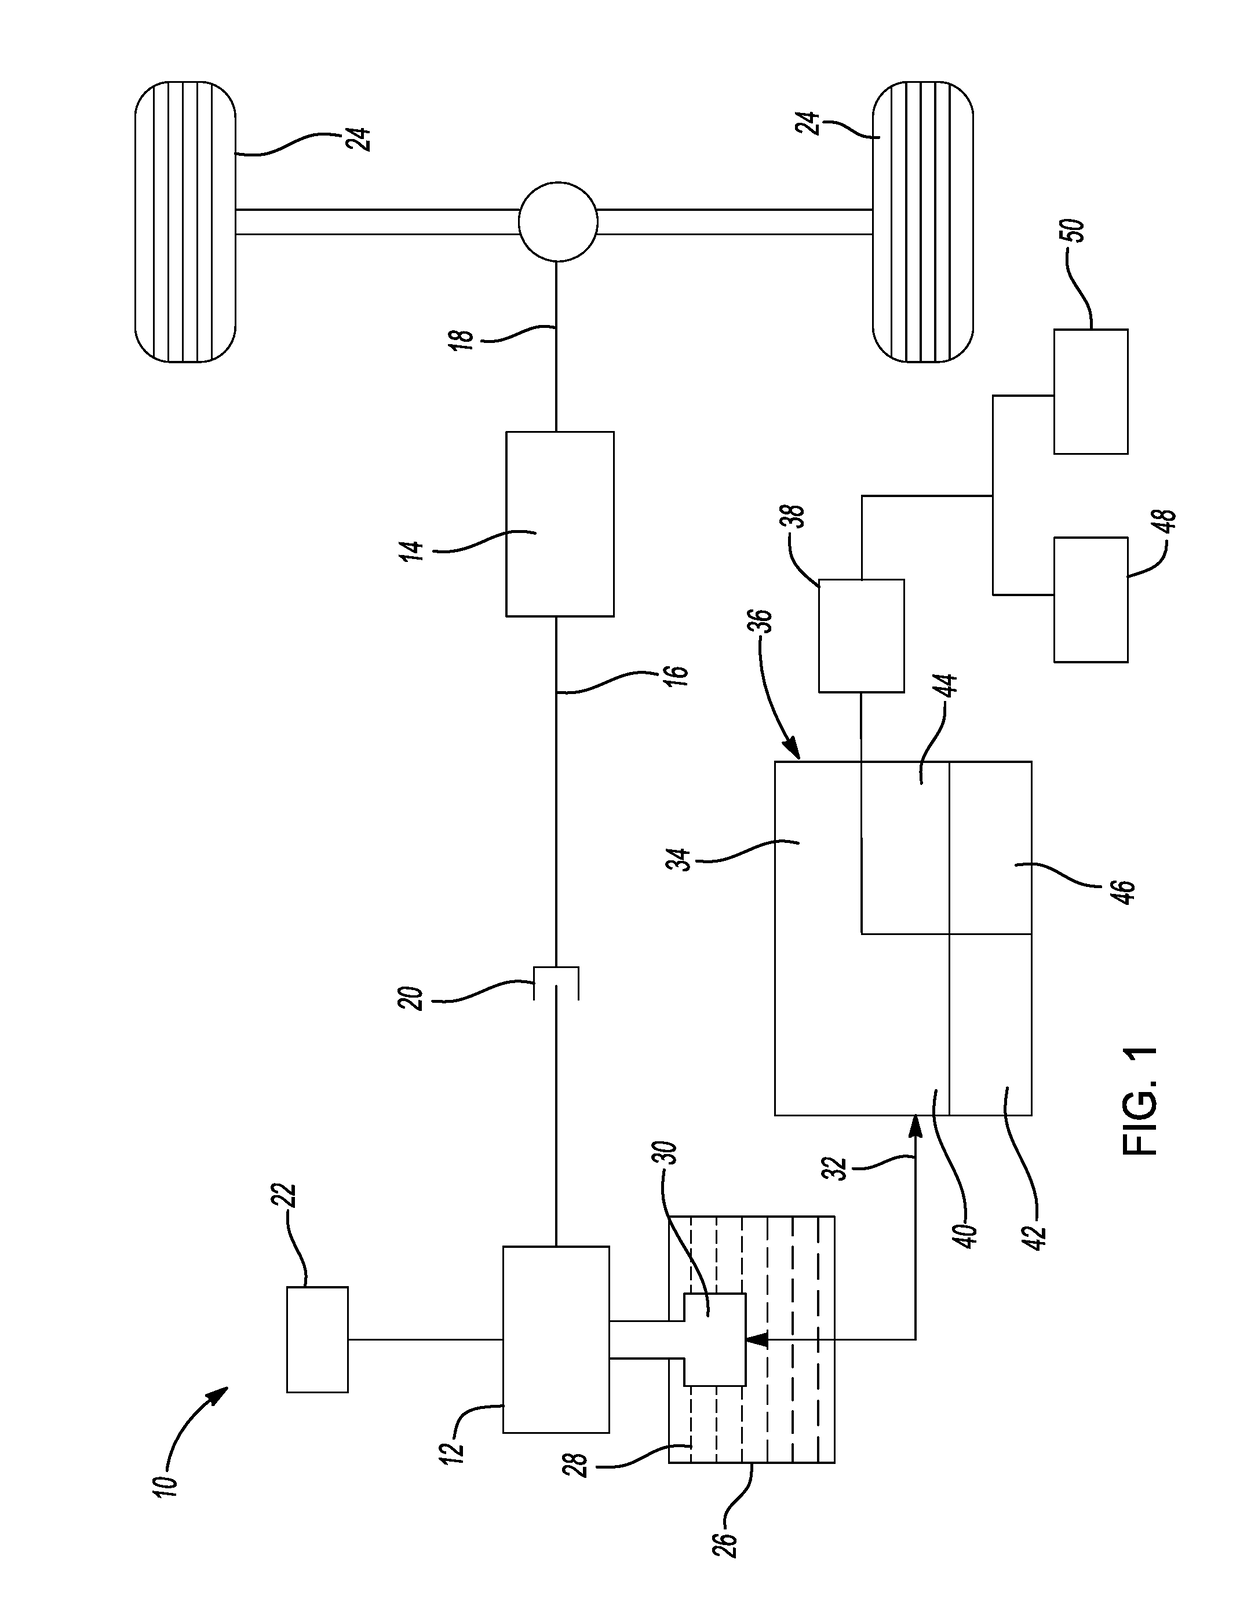 Fault mitigation for electrical actuator using regulated voltage control